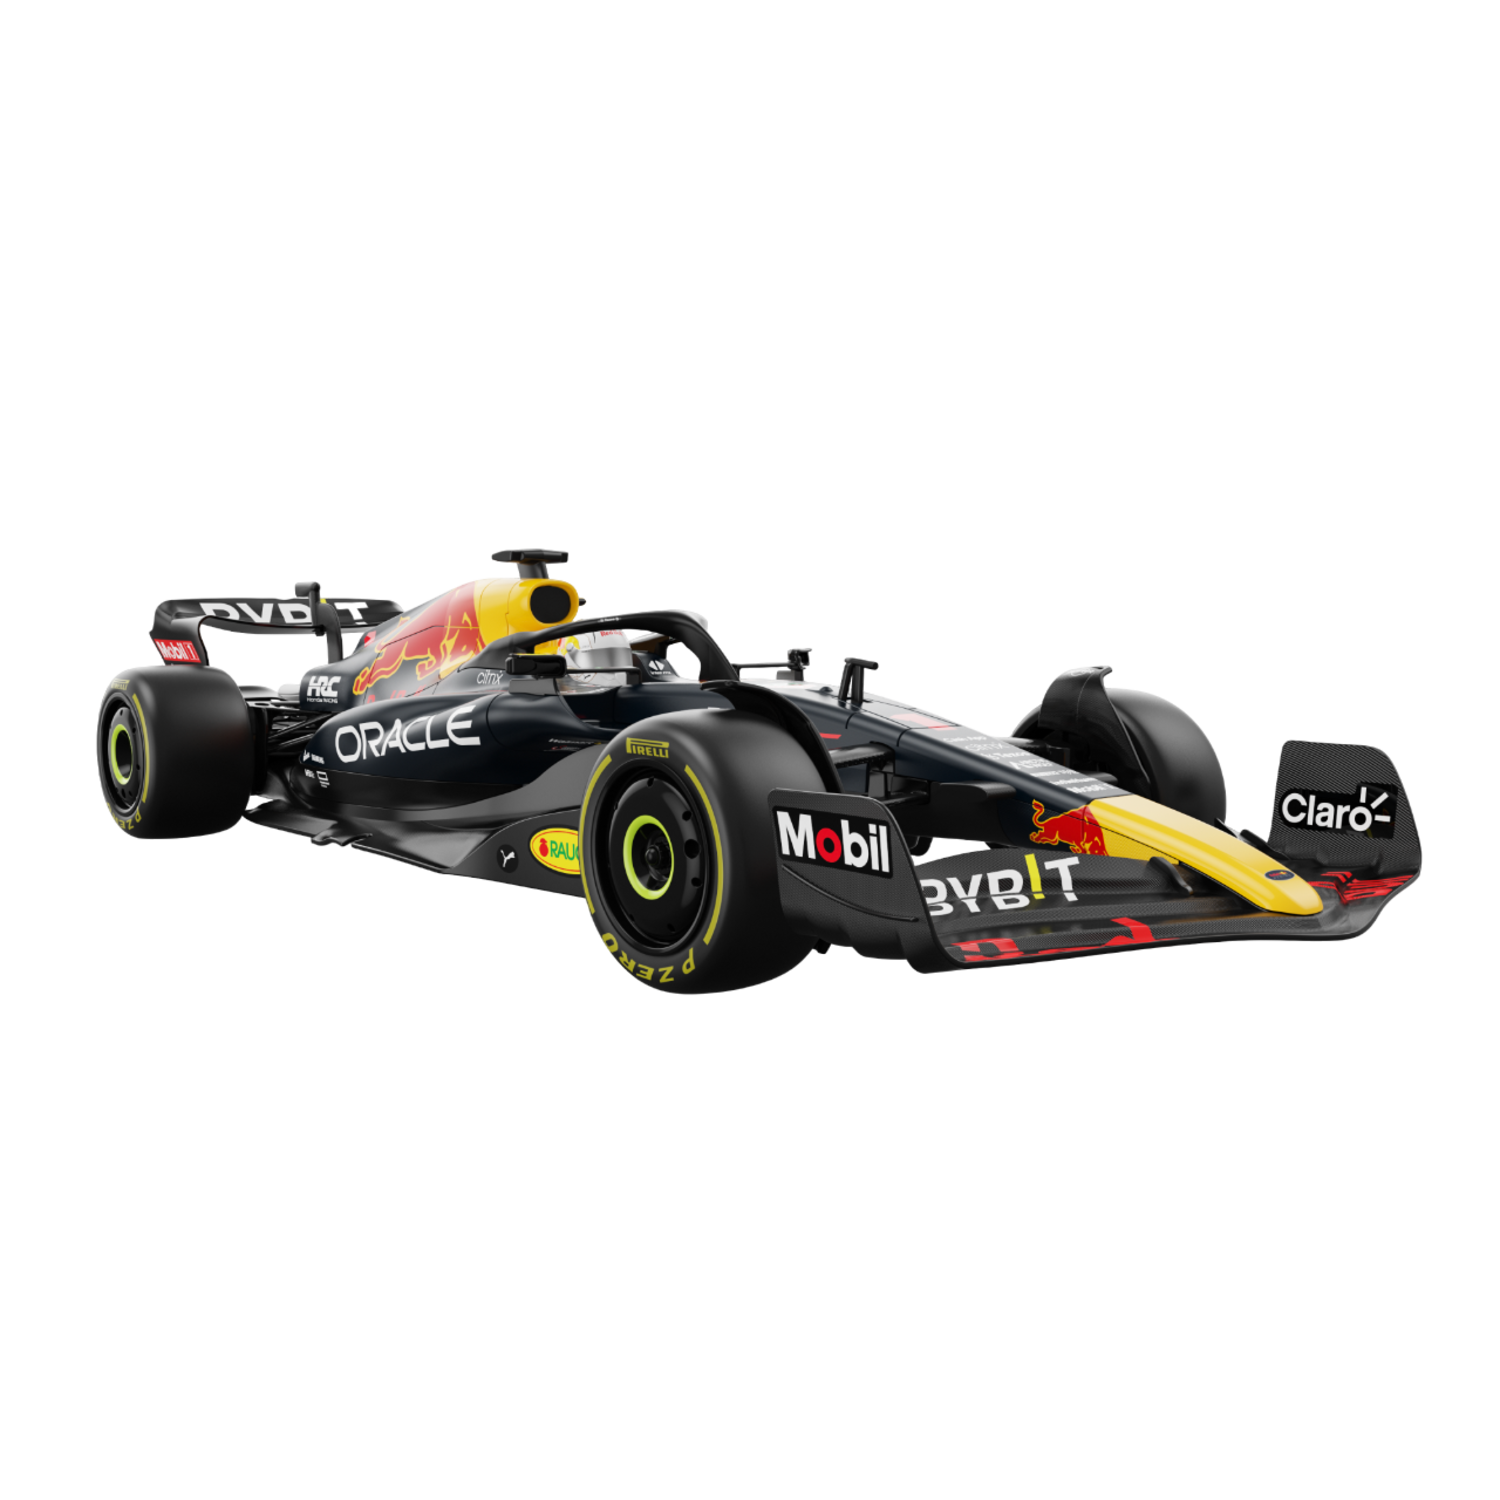 Pirox Toys Rc 1:12 Oracle Red Bull Racing